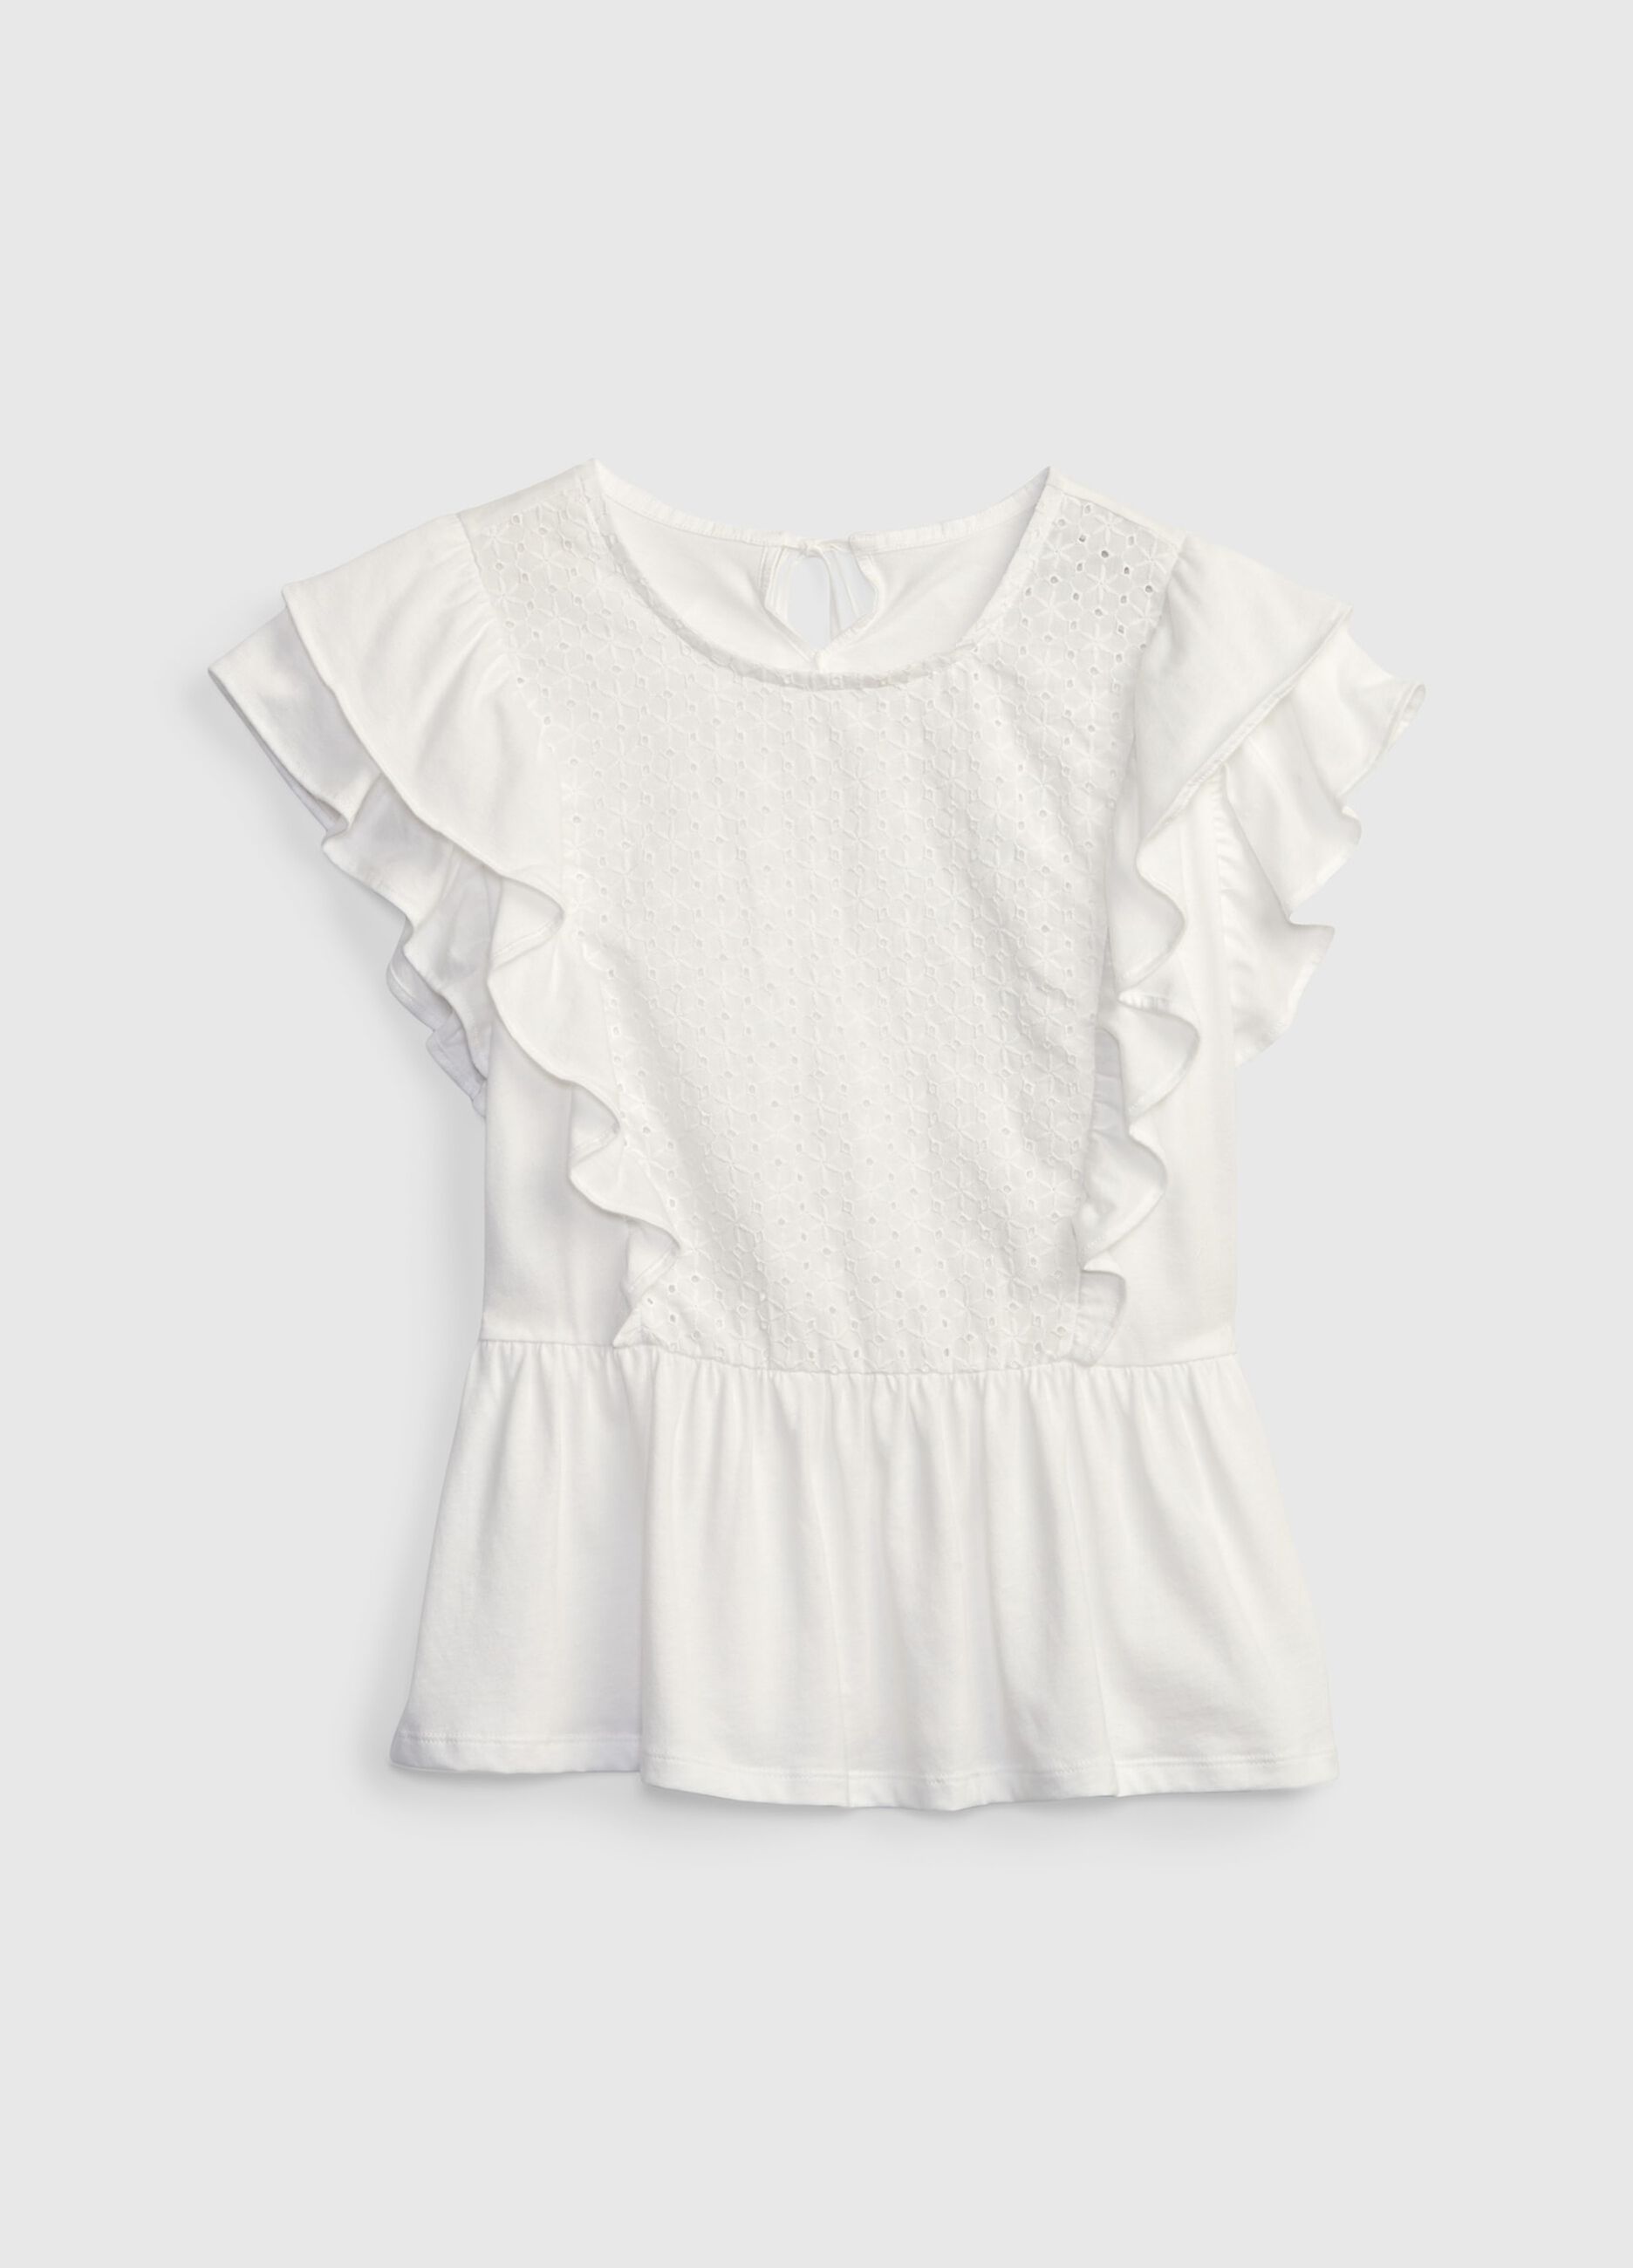 T-shirt with broderie anglaise lace and frills